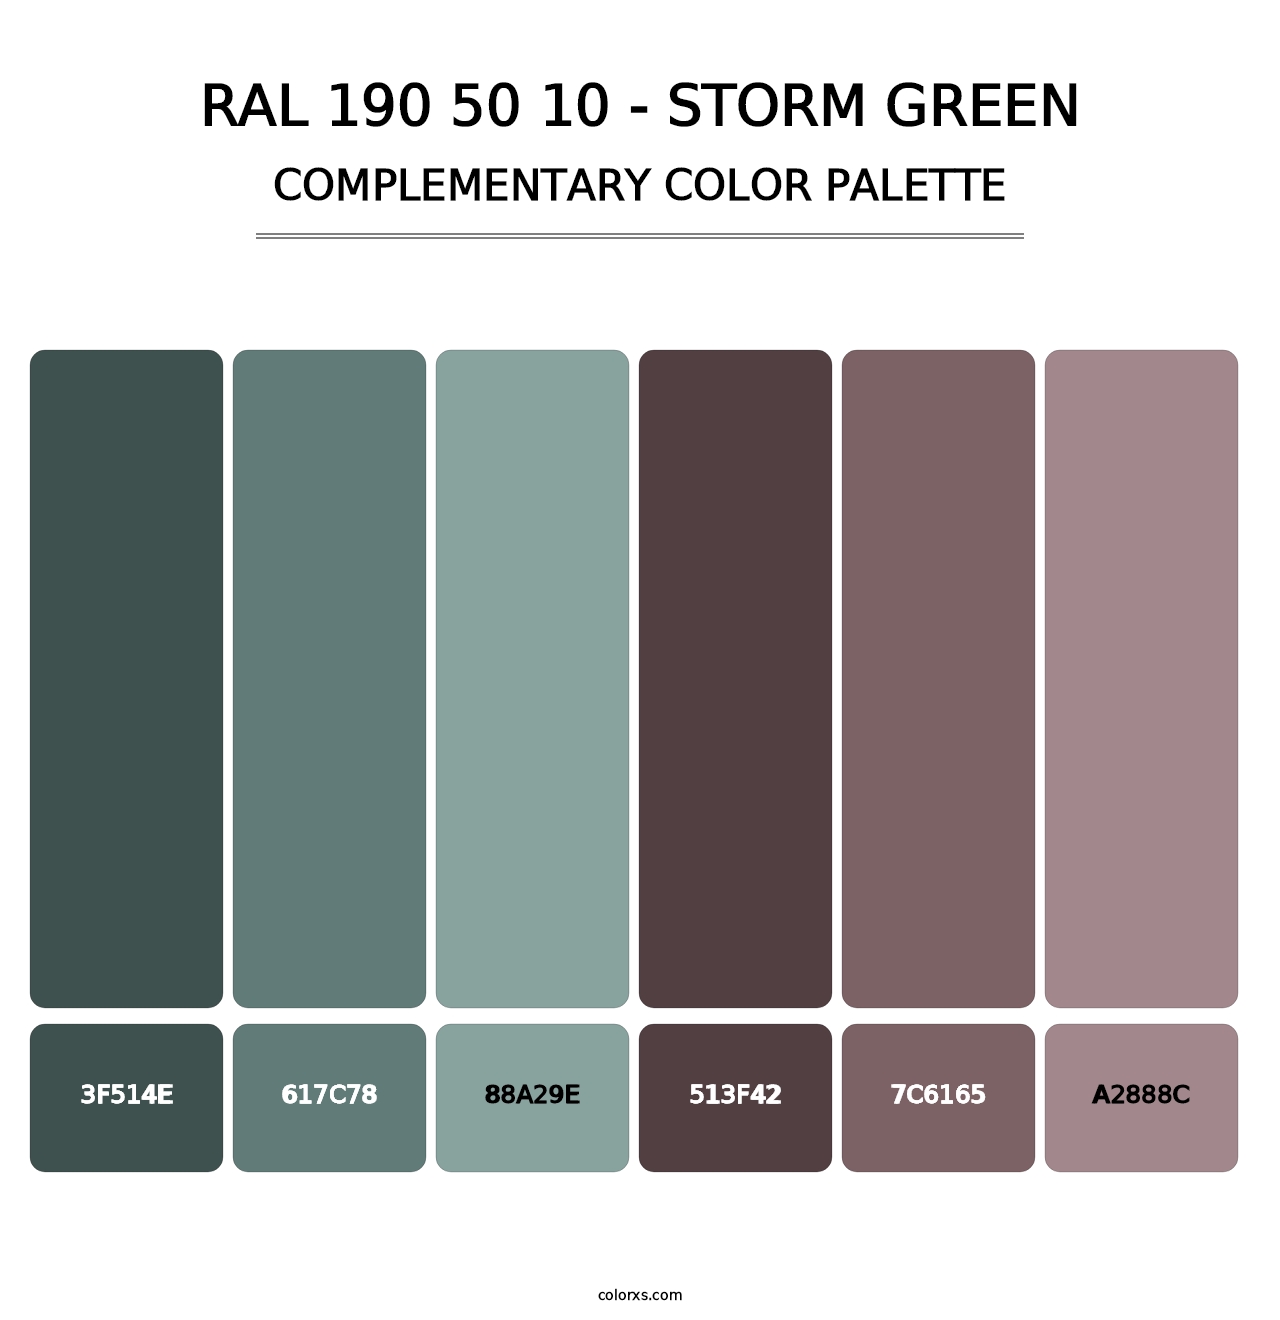 RAL 190 50 10 - Storm Green - Complementary Color Palette